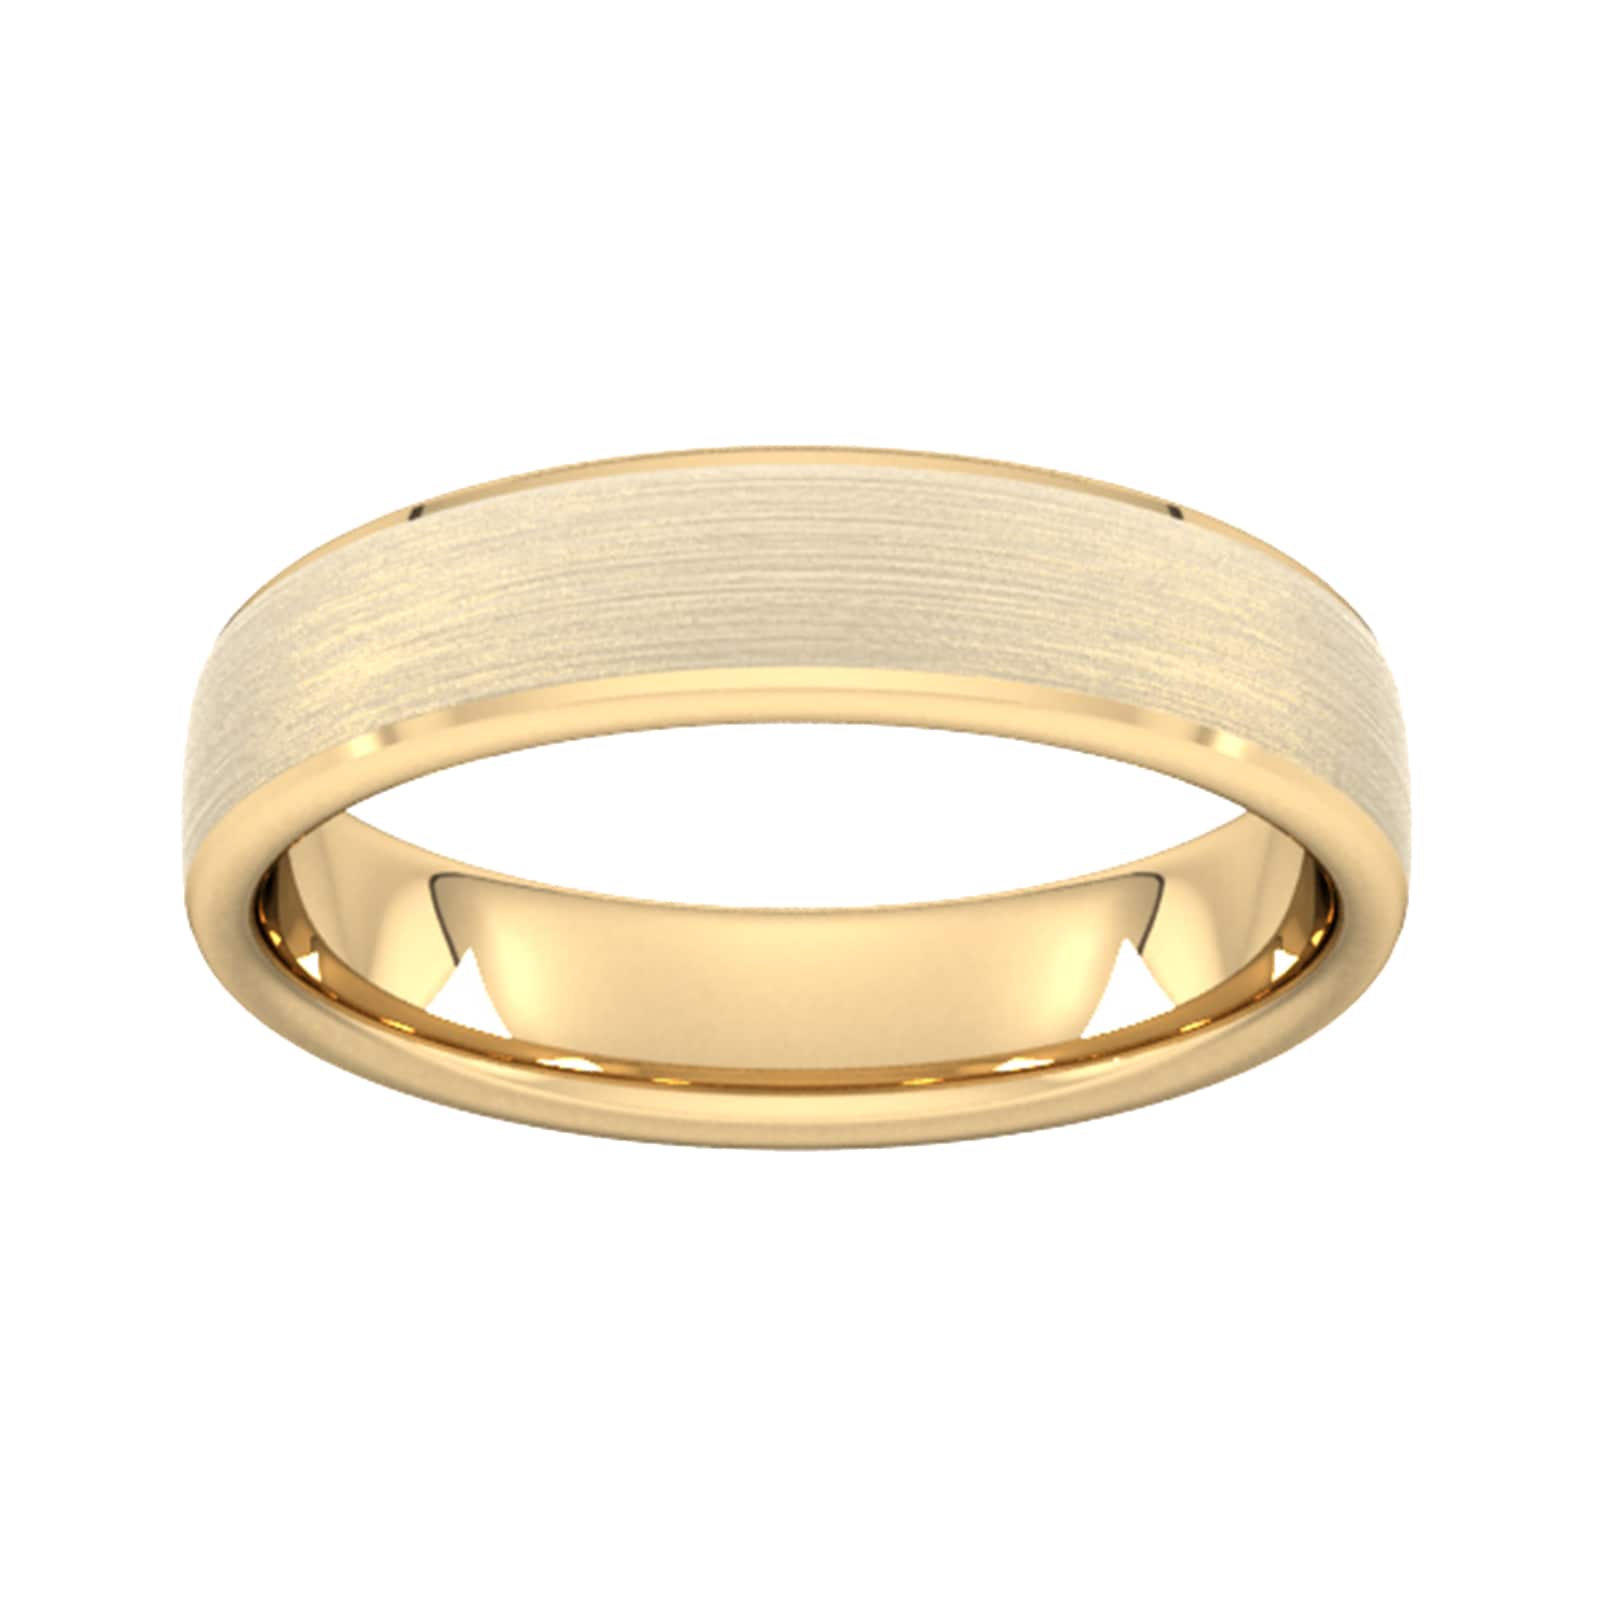 5mm D Shape Heavy Polished Chamfered Edges With Matt Centre Wedding Ring In 9 Carat Yellow Gold - Ring Size V